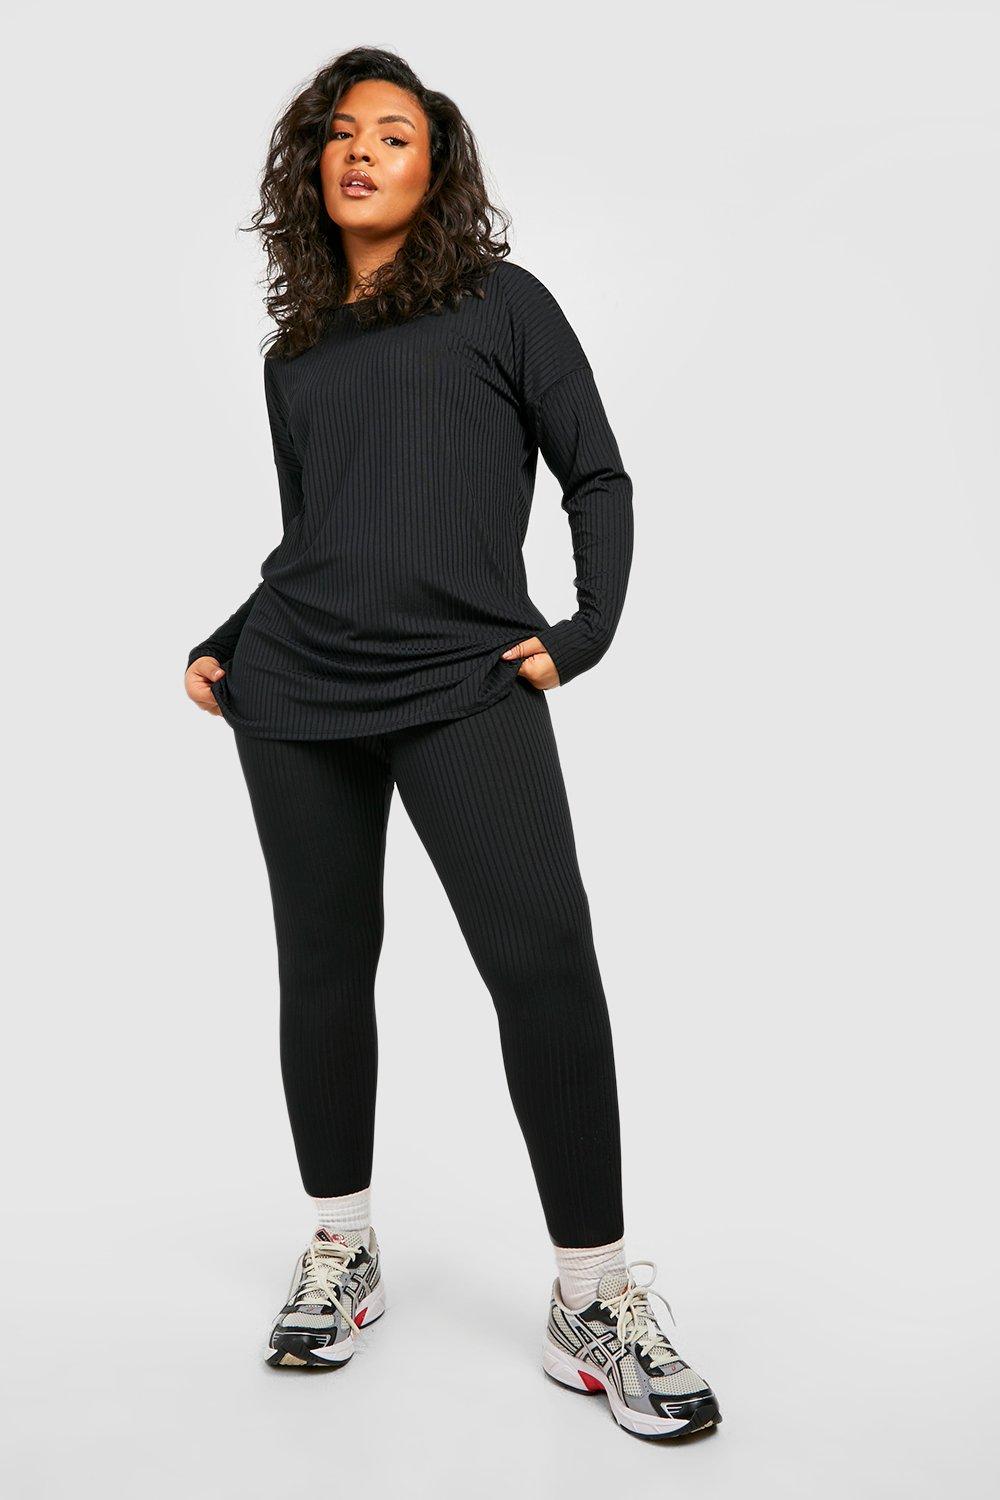 Plus Oversized Rib Top and Legging Co-Ord